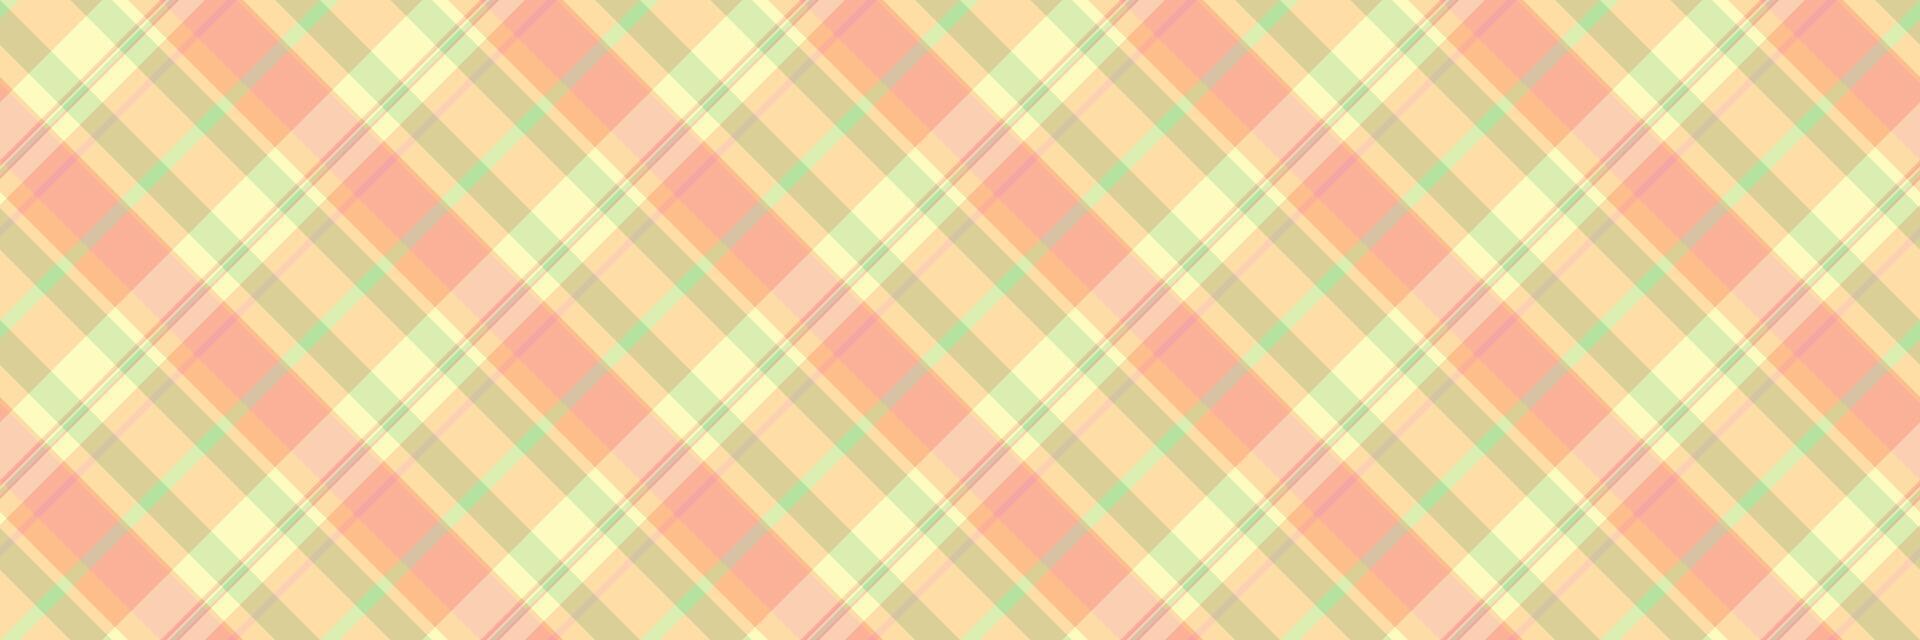 Textured plaid pattern fabric, festive texture tartan . Shabby check background seamless textile in light and amber colors. vector